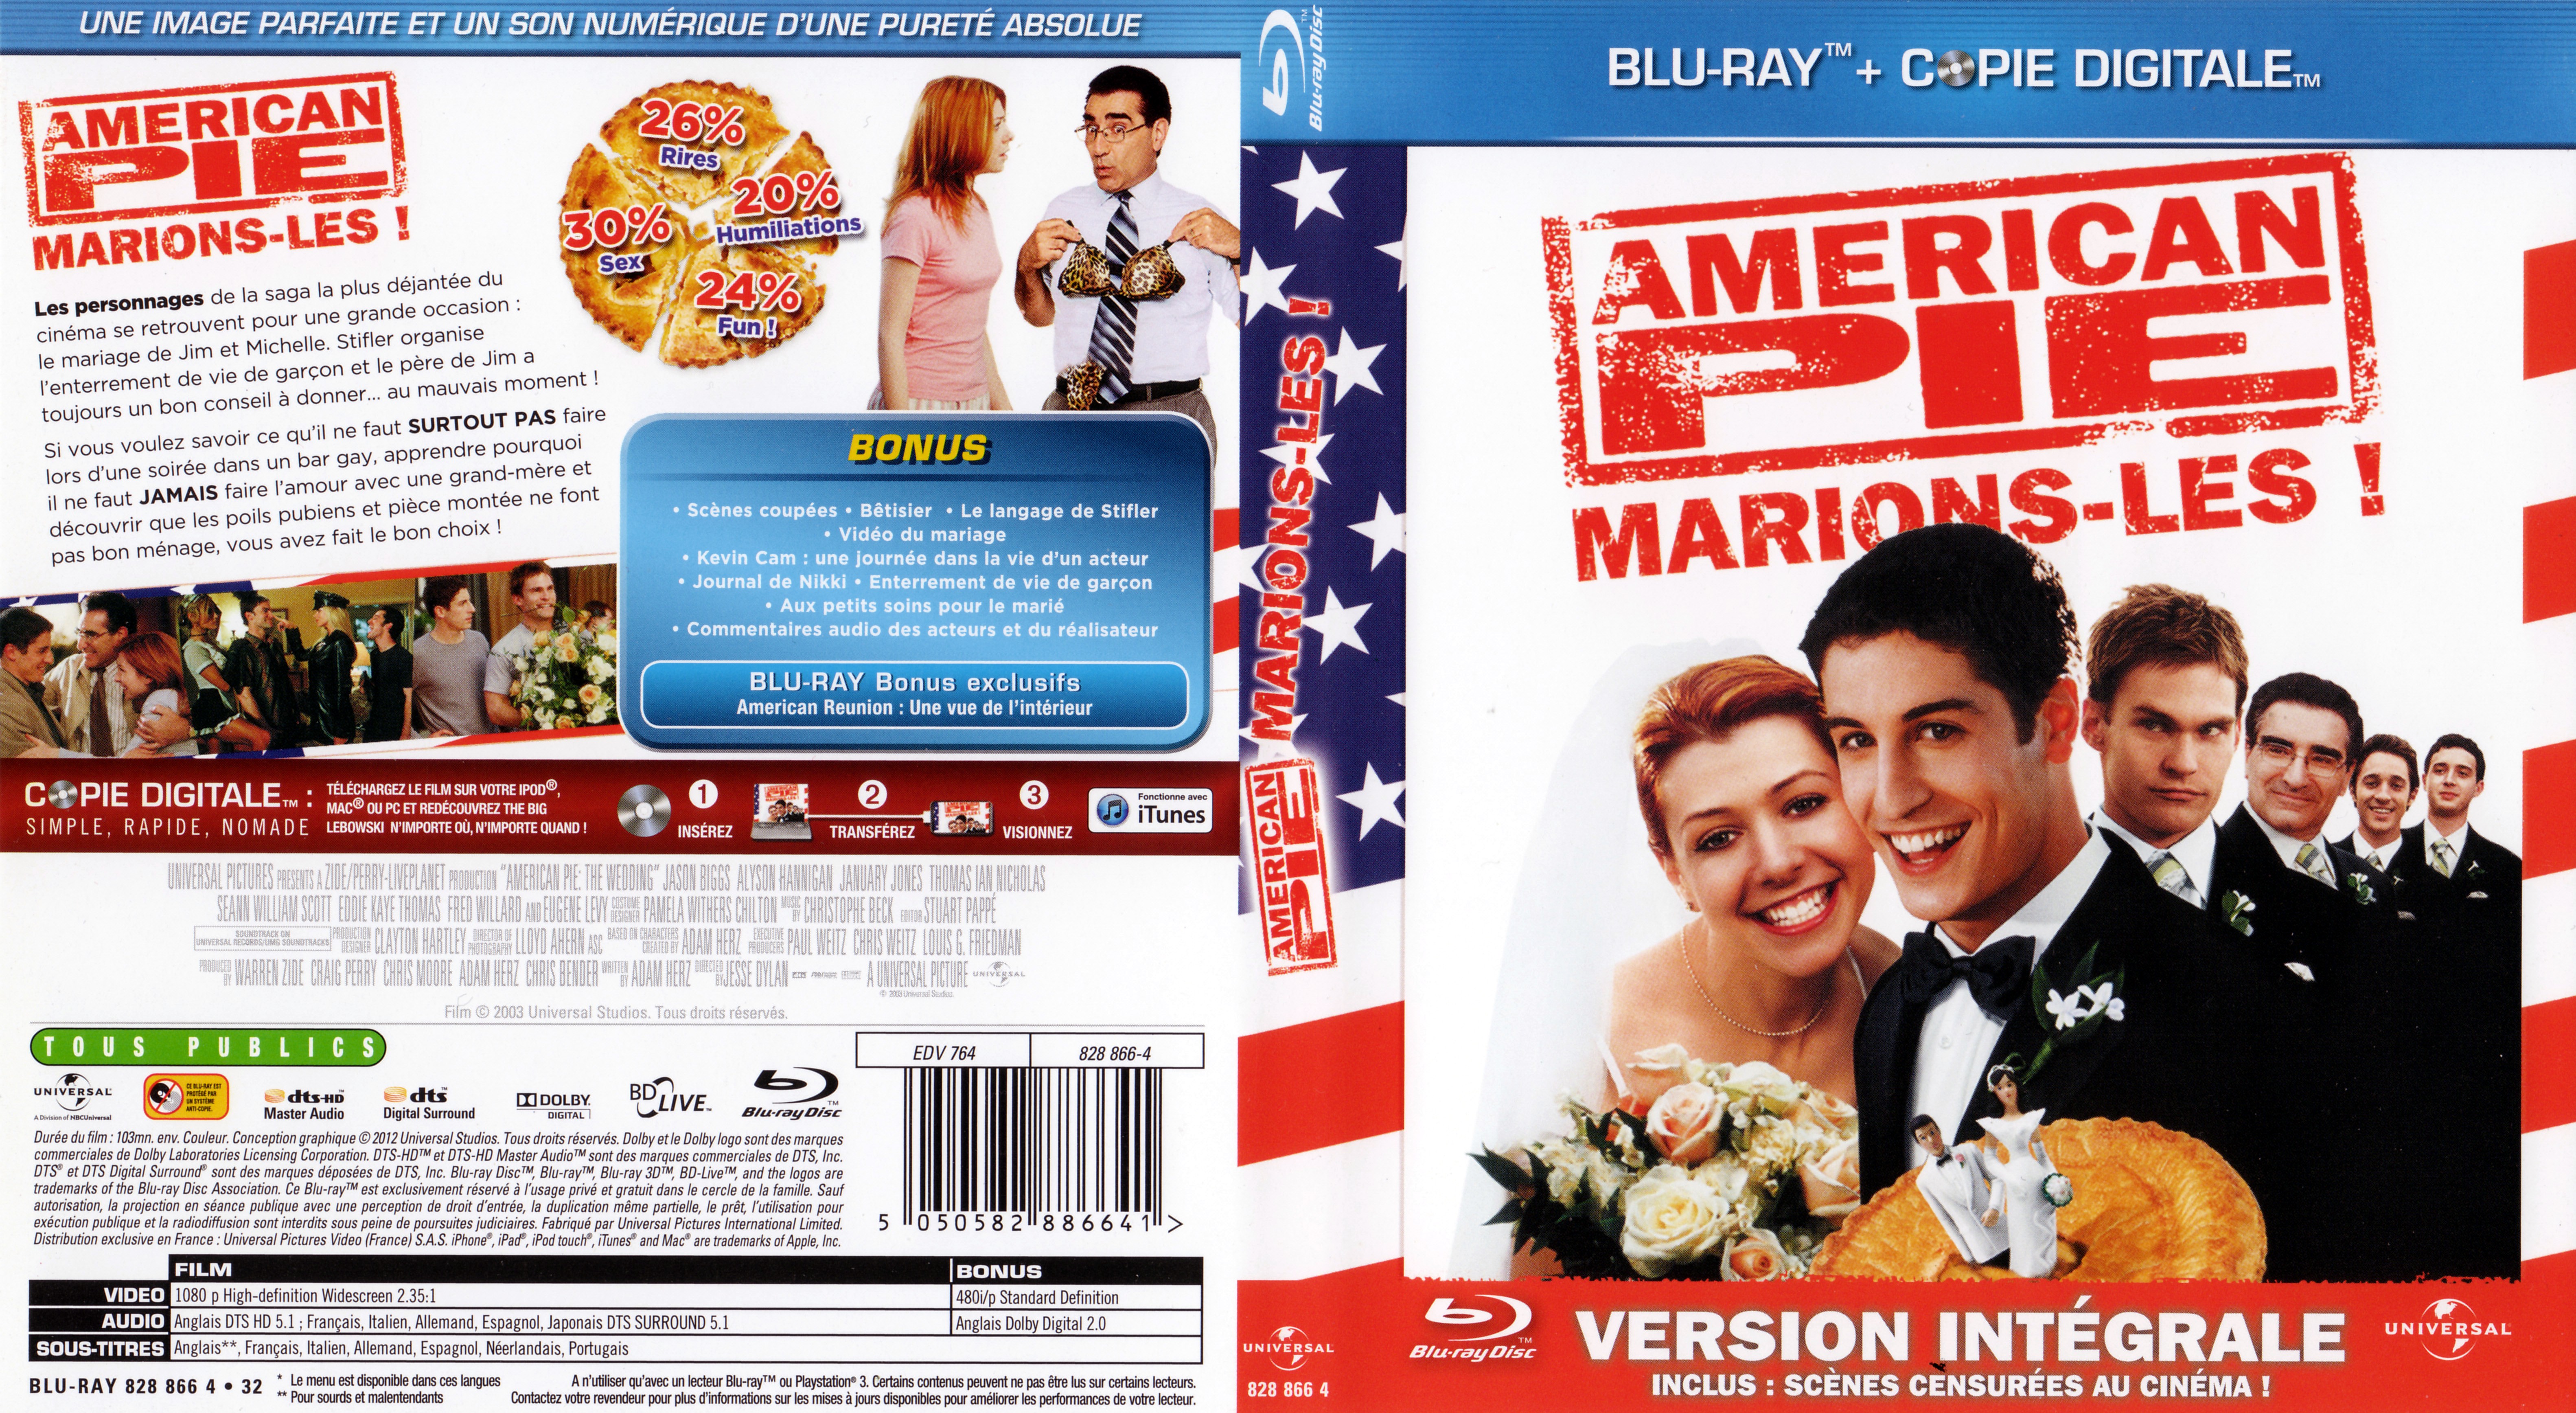 Jaquette DVD American pie - marions-les (BLU-RAY)